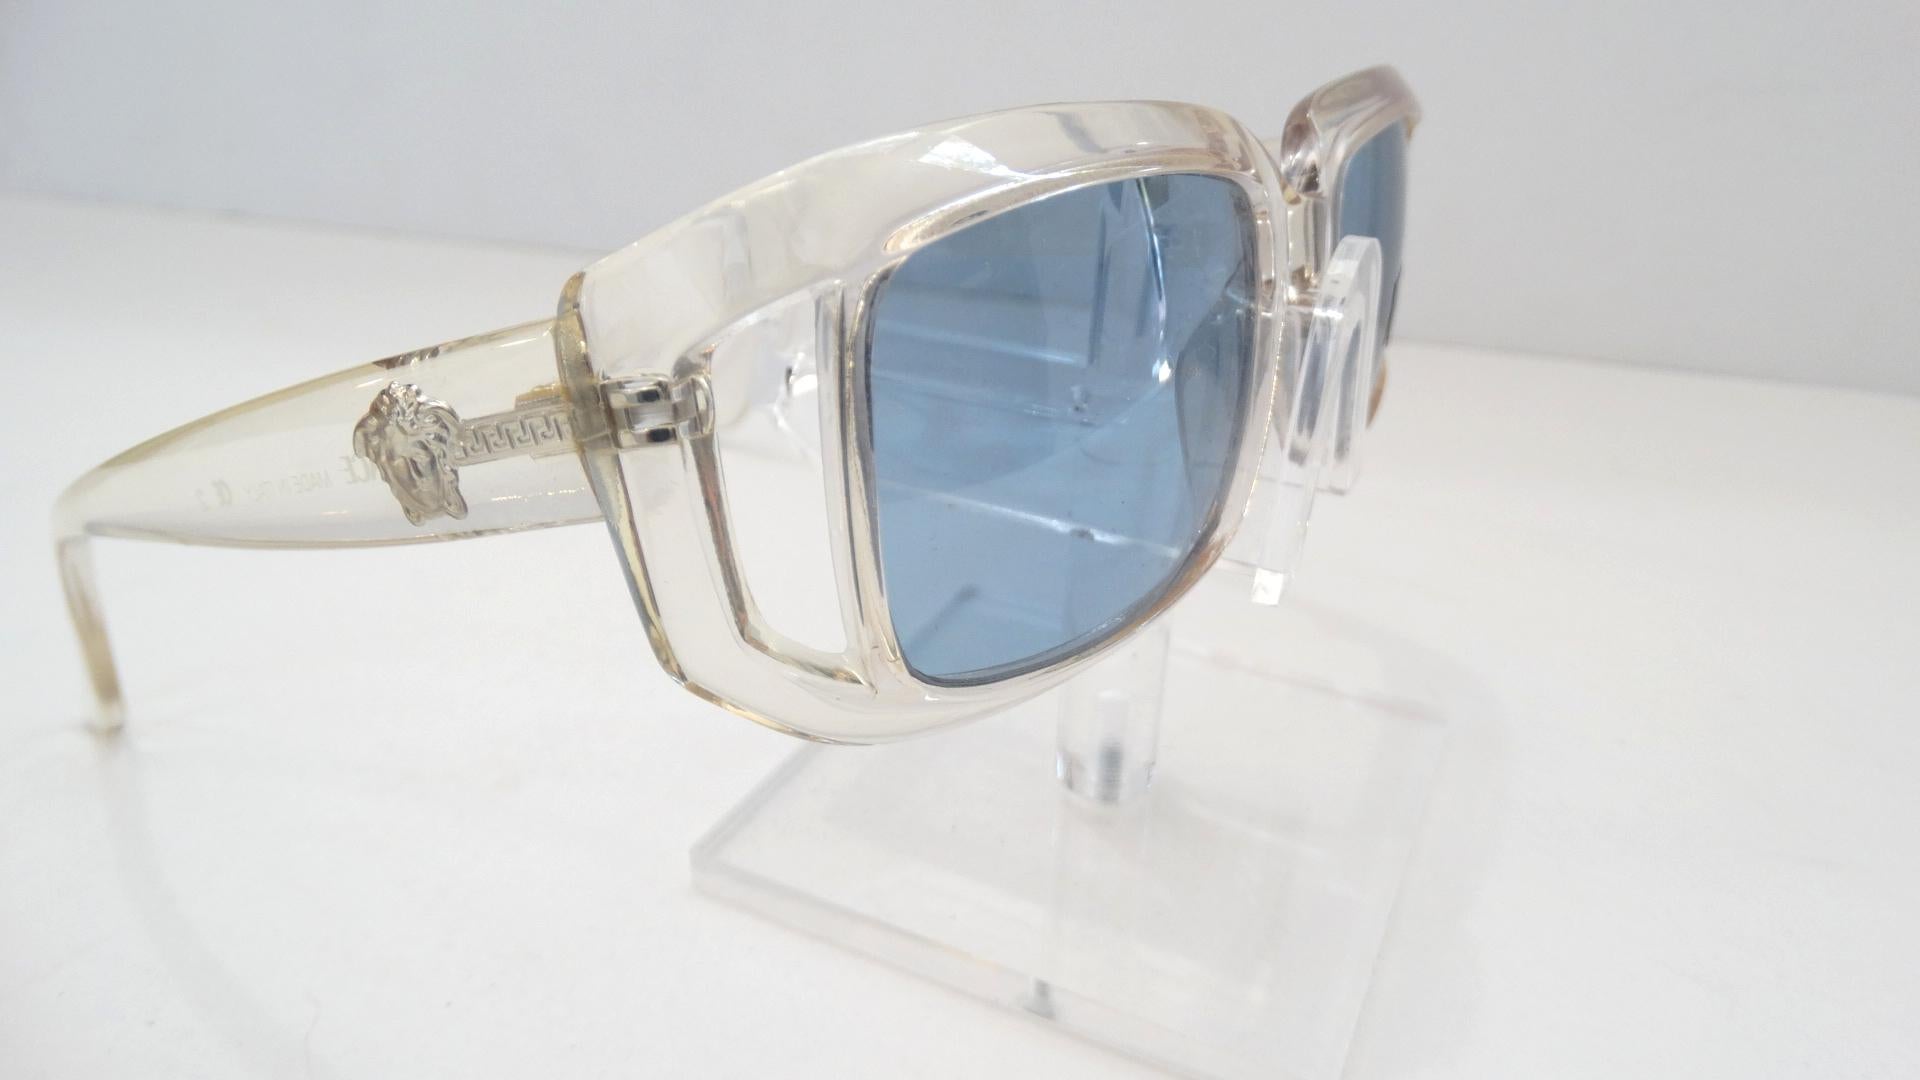 Versace 1990s Clear Rectangular Frame Sunglasses In Good Condition For Sale In Scottsdale, AZ